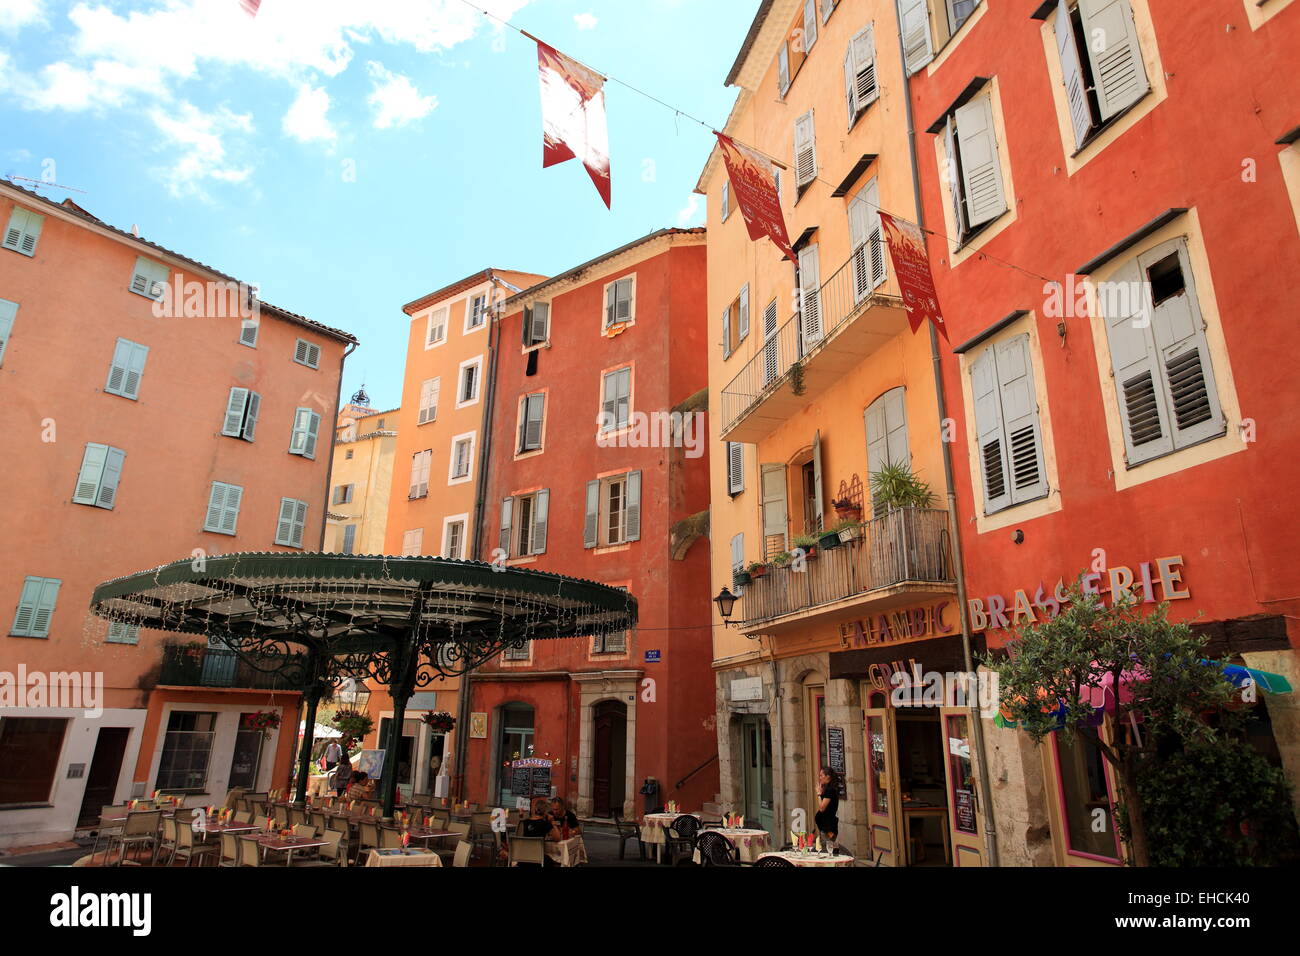 Place du petit Puy in the old city of Grasse on the French Riviera, France Stock Photo